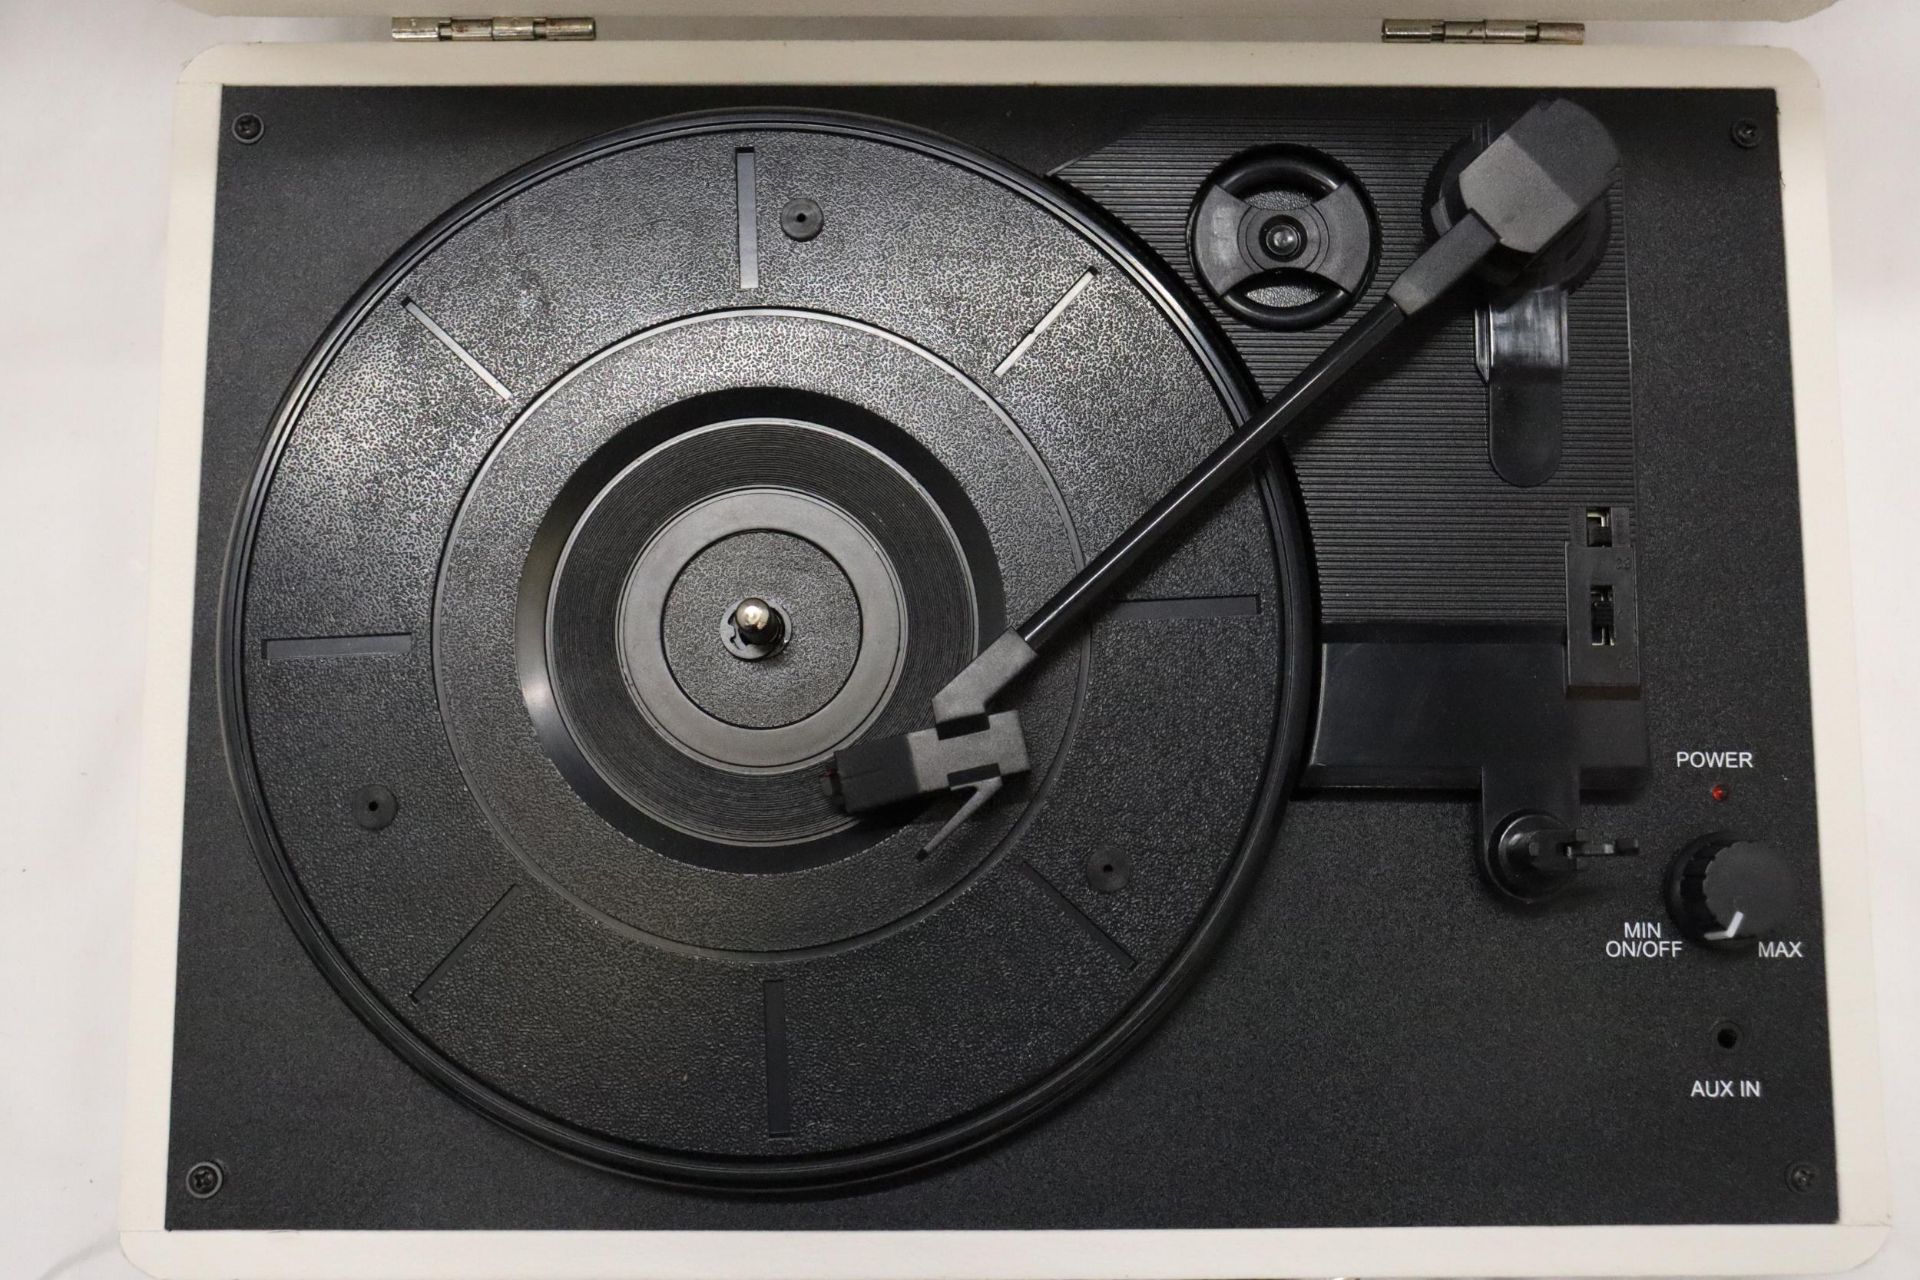 A MAXTEK 'SUITCASE' RECORD PLAYER WITH INSTRUCTIONS - Image 5 of 10